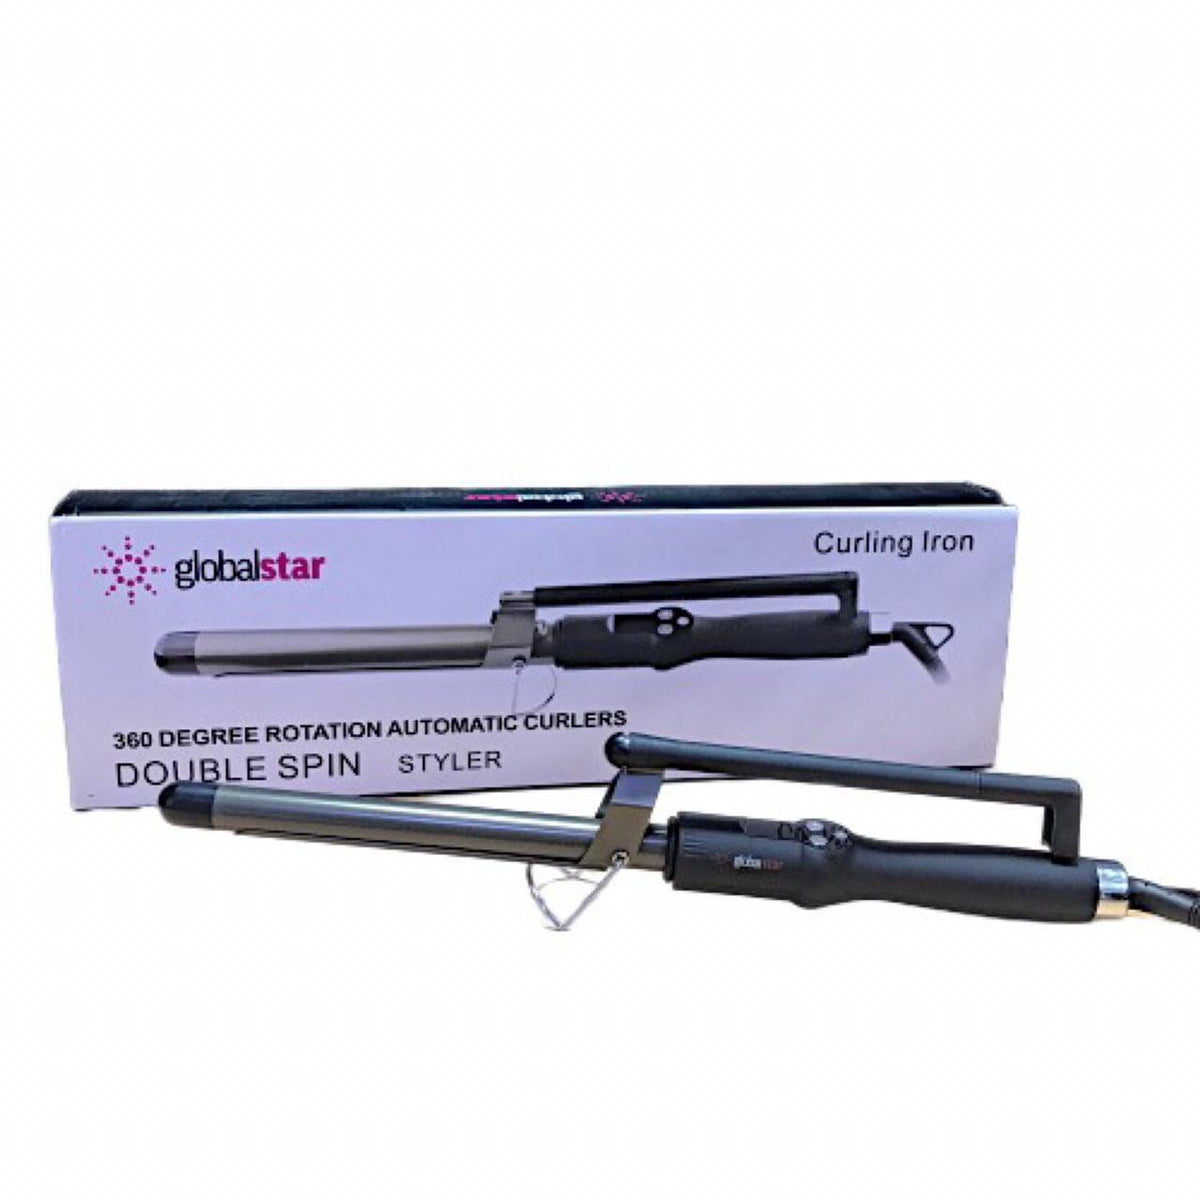 Globalstar 360 Degree Rotation Automatic Curlers Double Spin Styler BS-19 - Awarid UAE